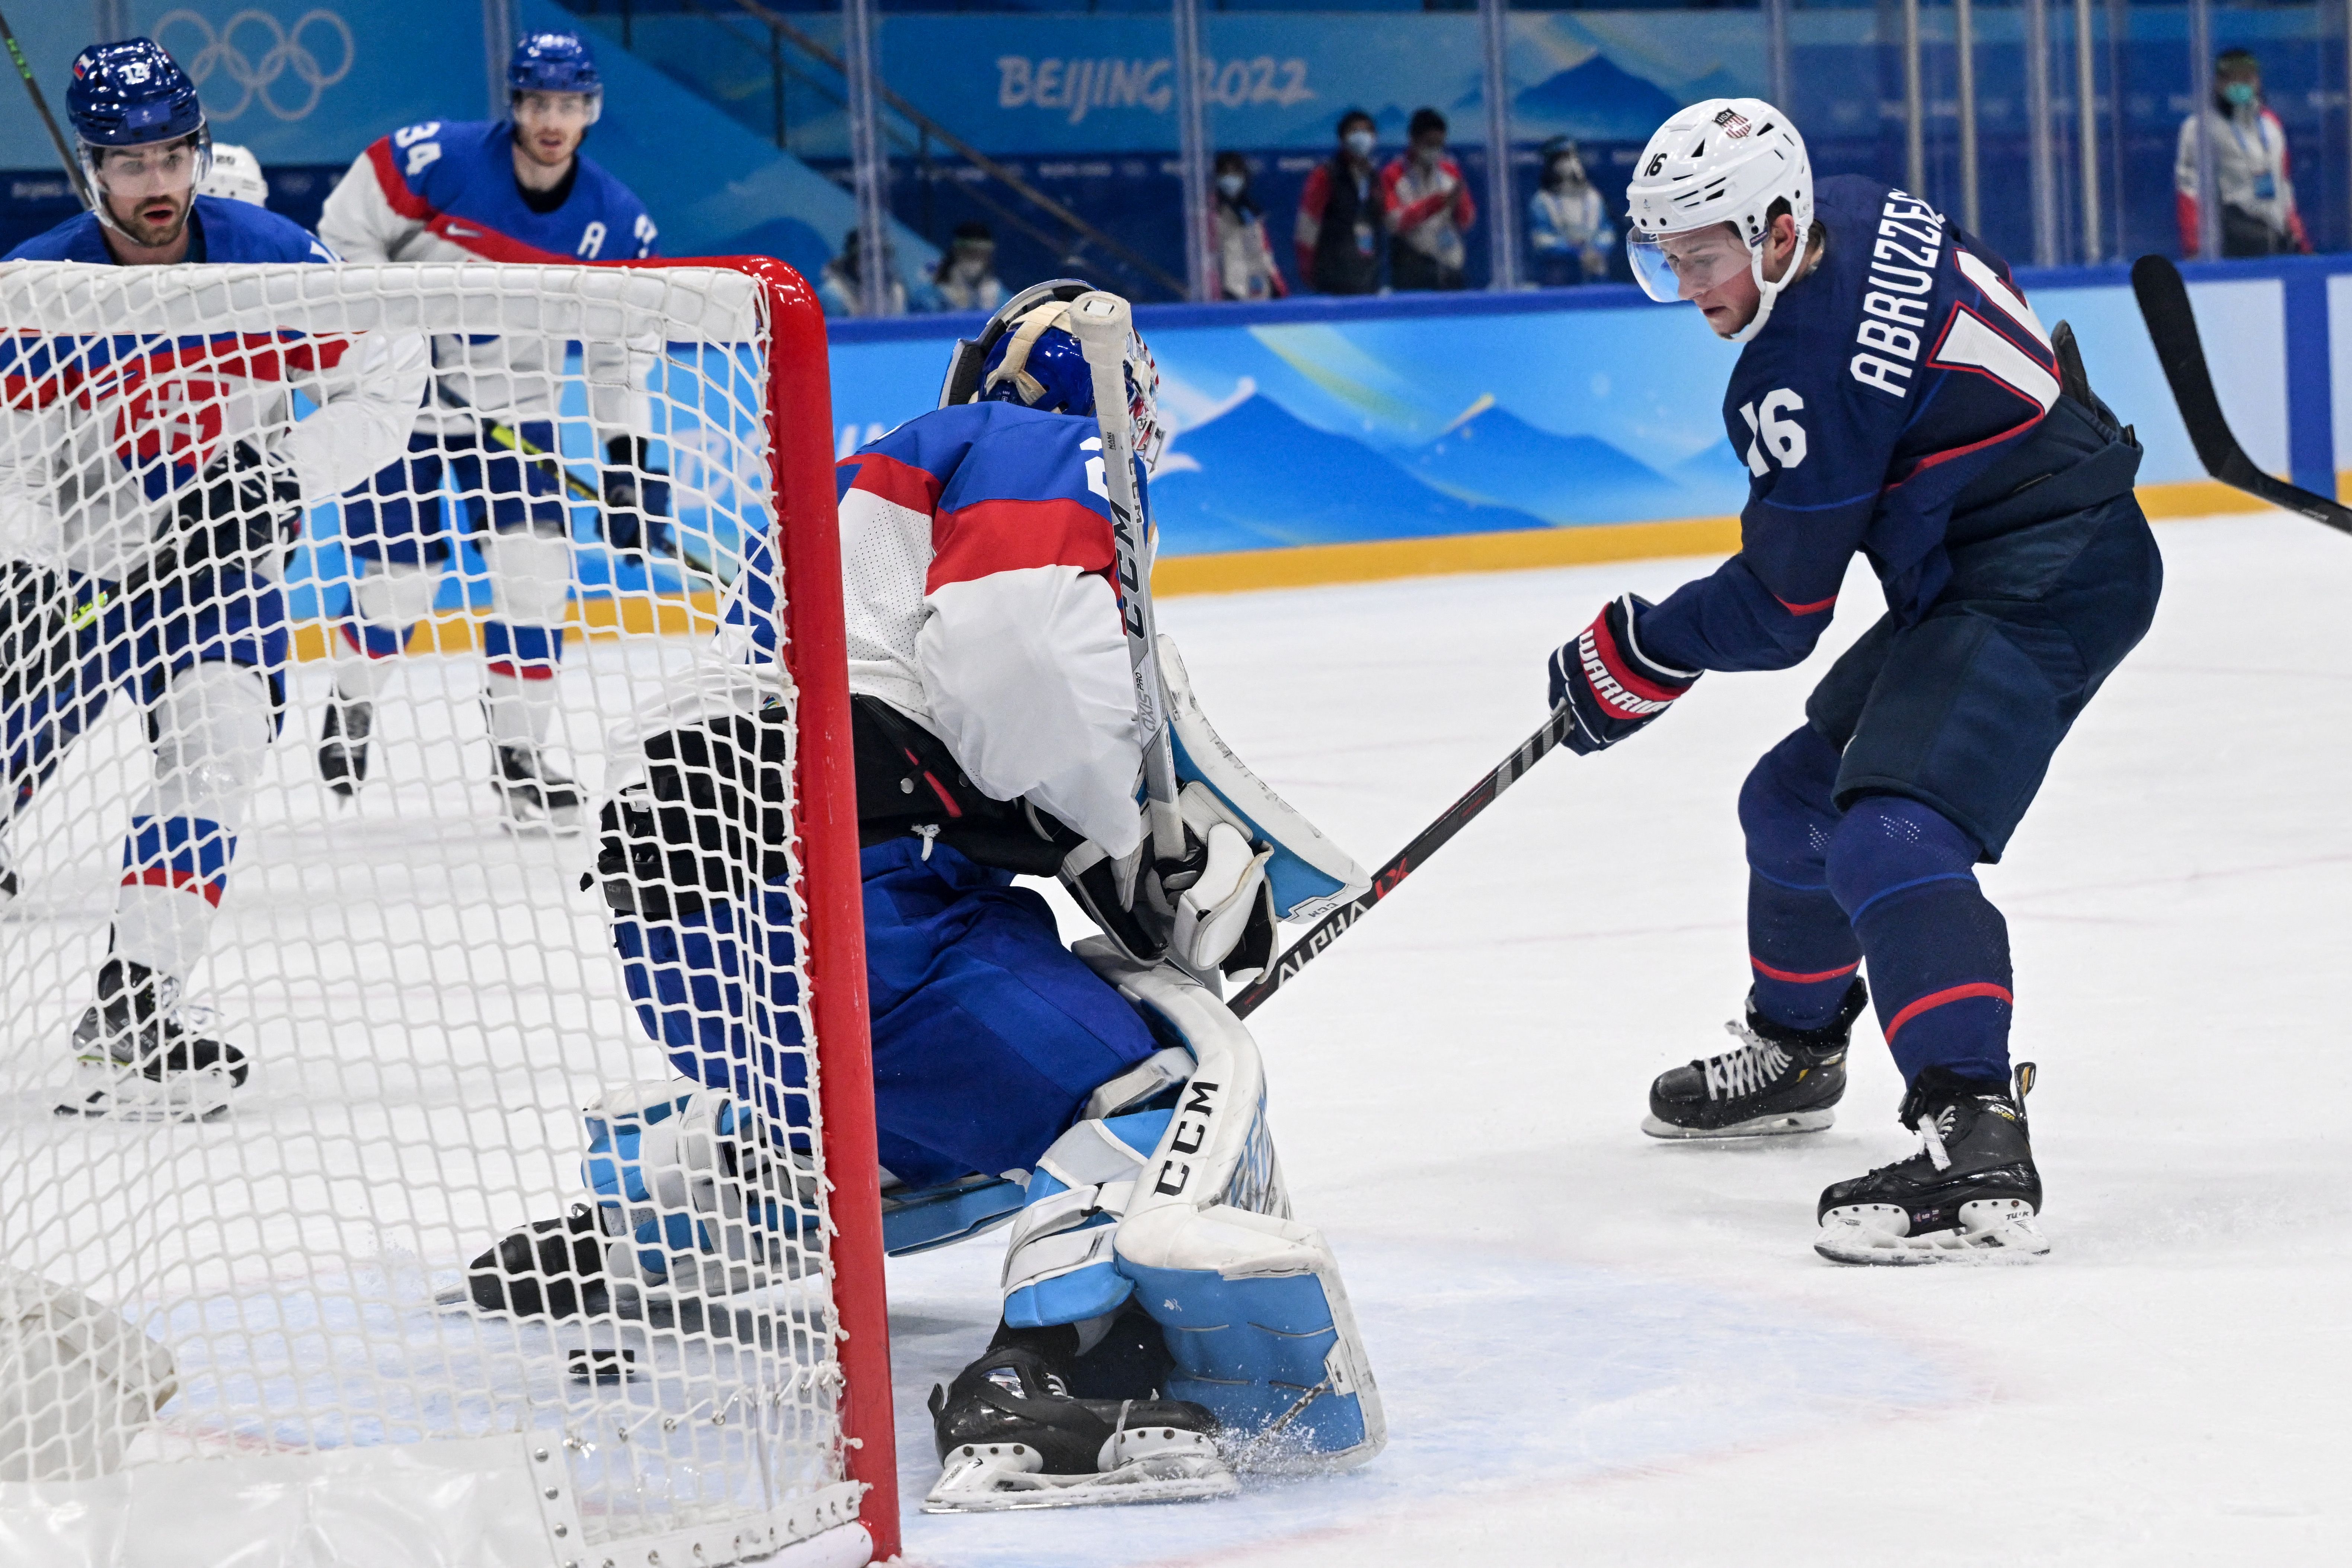 USA's Nick Abruzzese scores a goal during the men's play-off quarterfinal match of the Beijing 2022 Winter Olympic Games ice hockey competition on February 16.